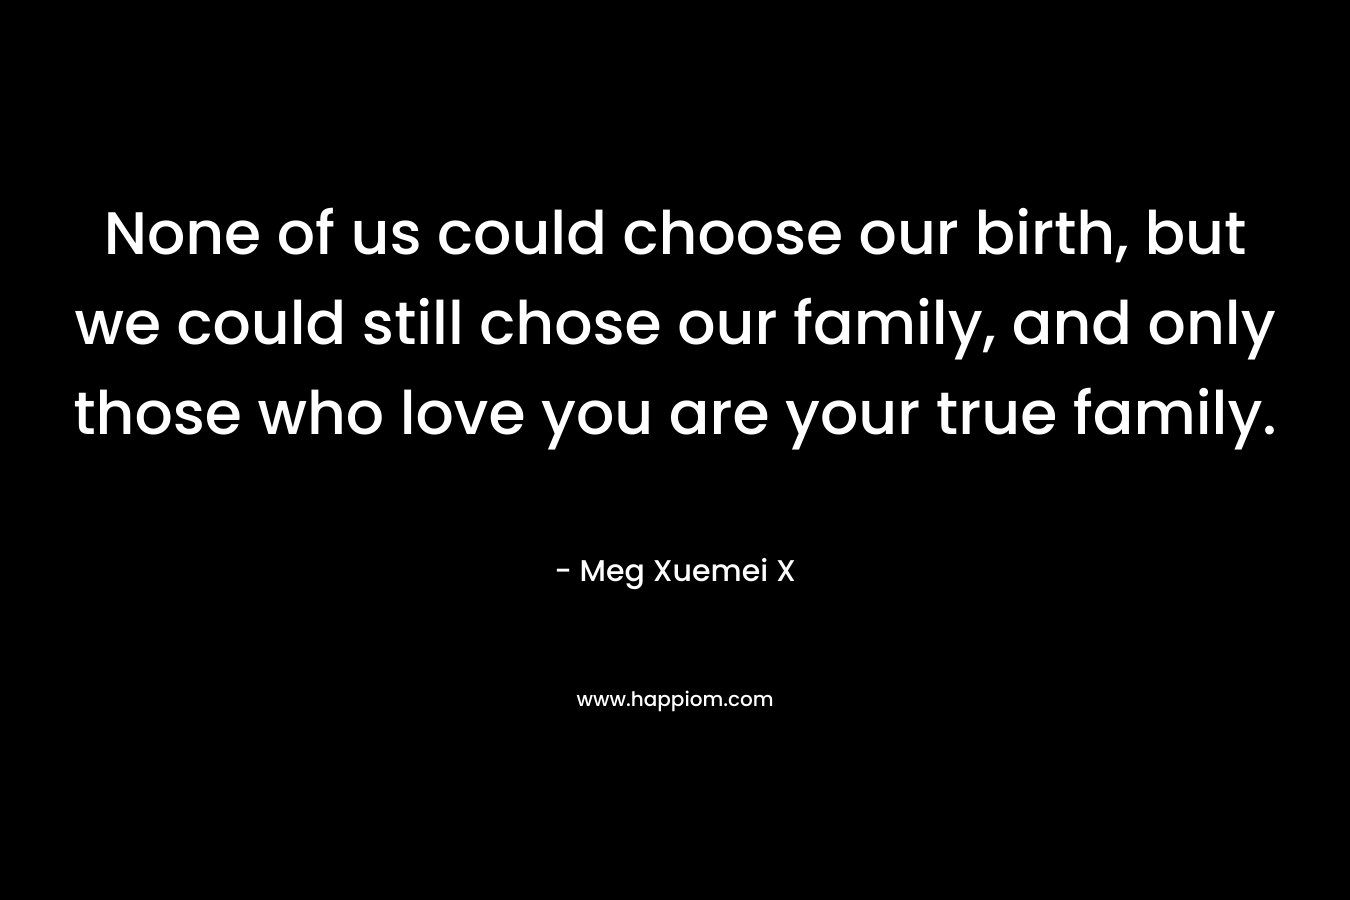 None of us could choose our birth, but we could still chose our family, and only those who love you are your true family.